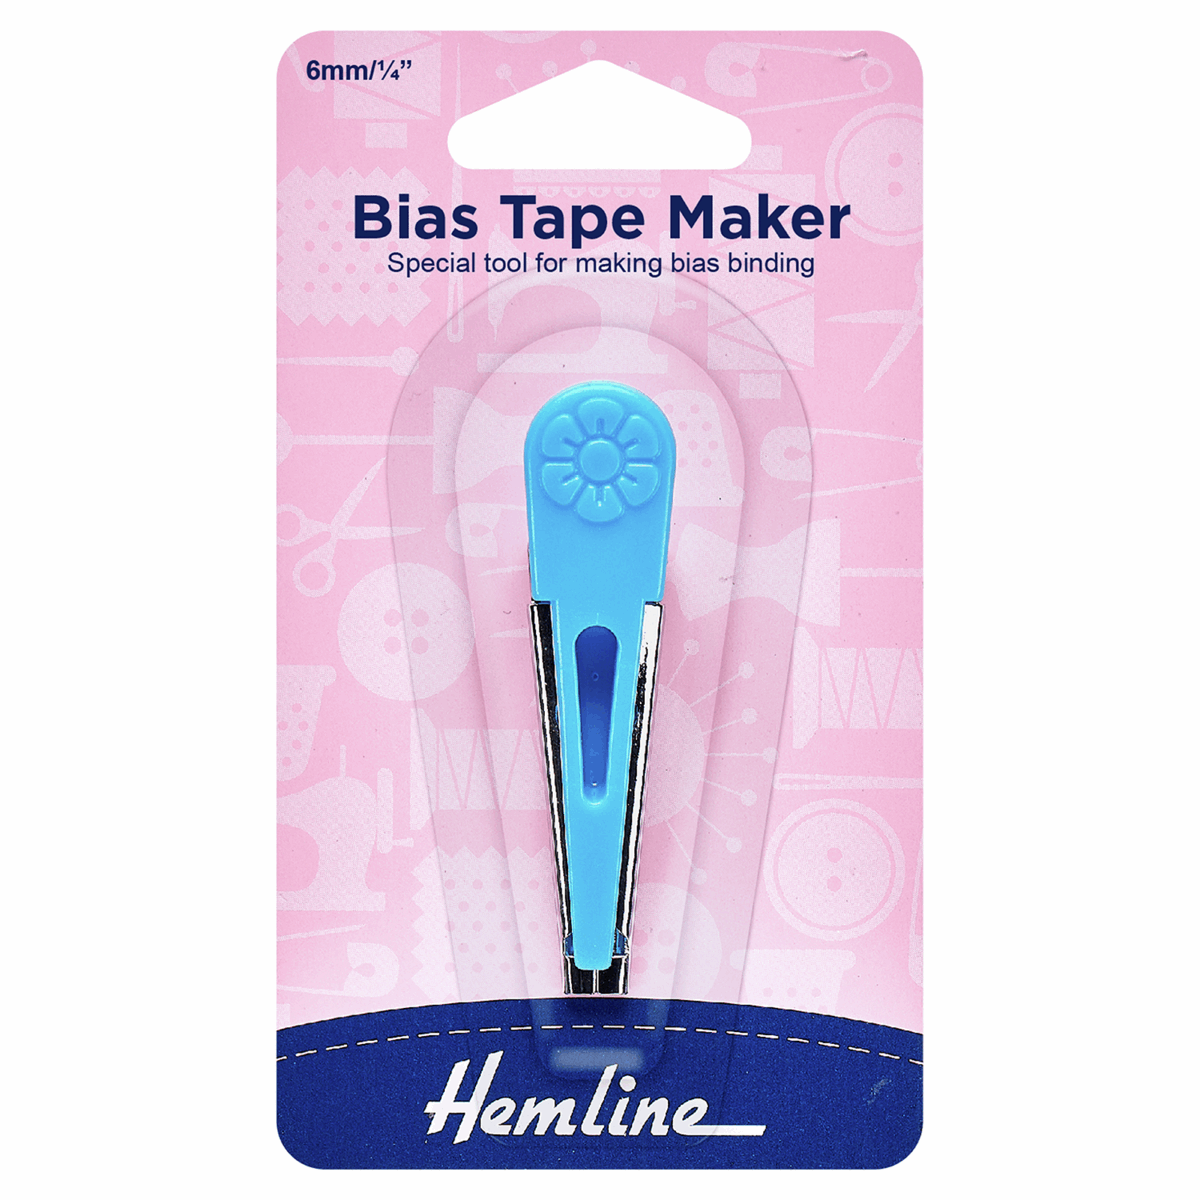 Bias Tape Maker - (3 Sizes Available)